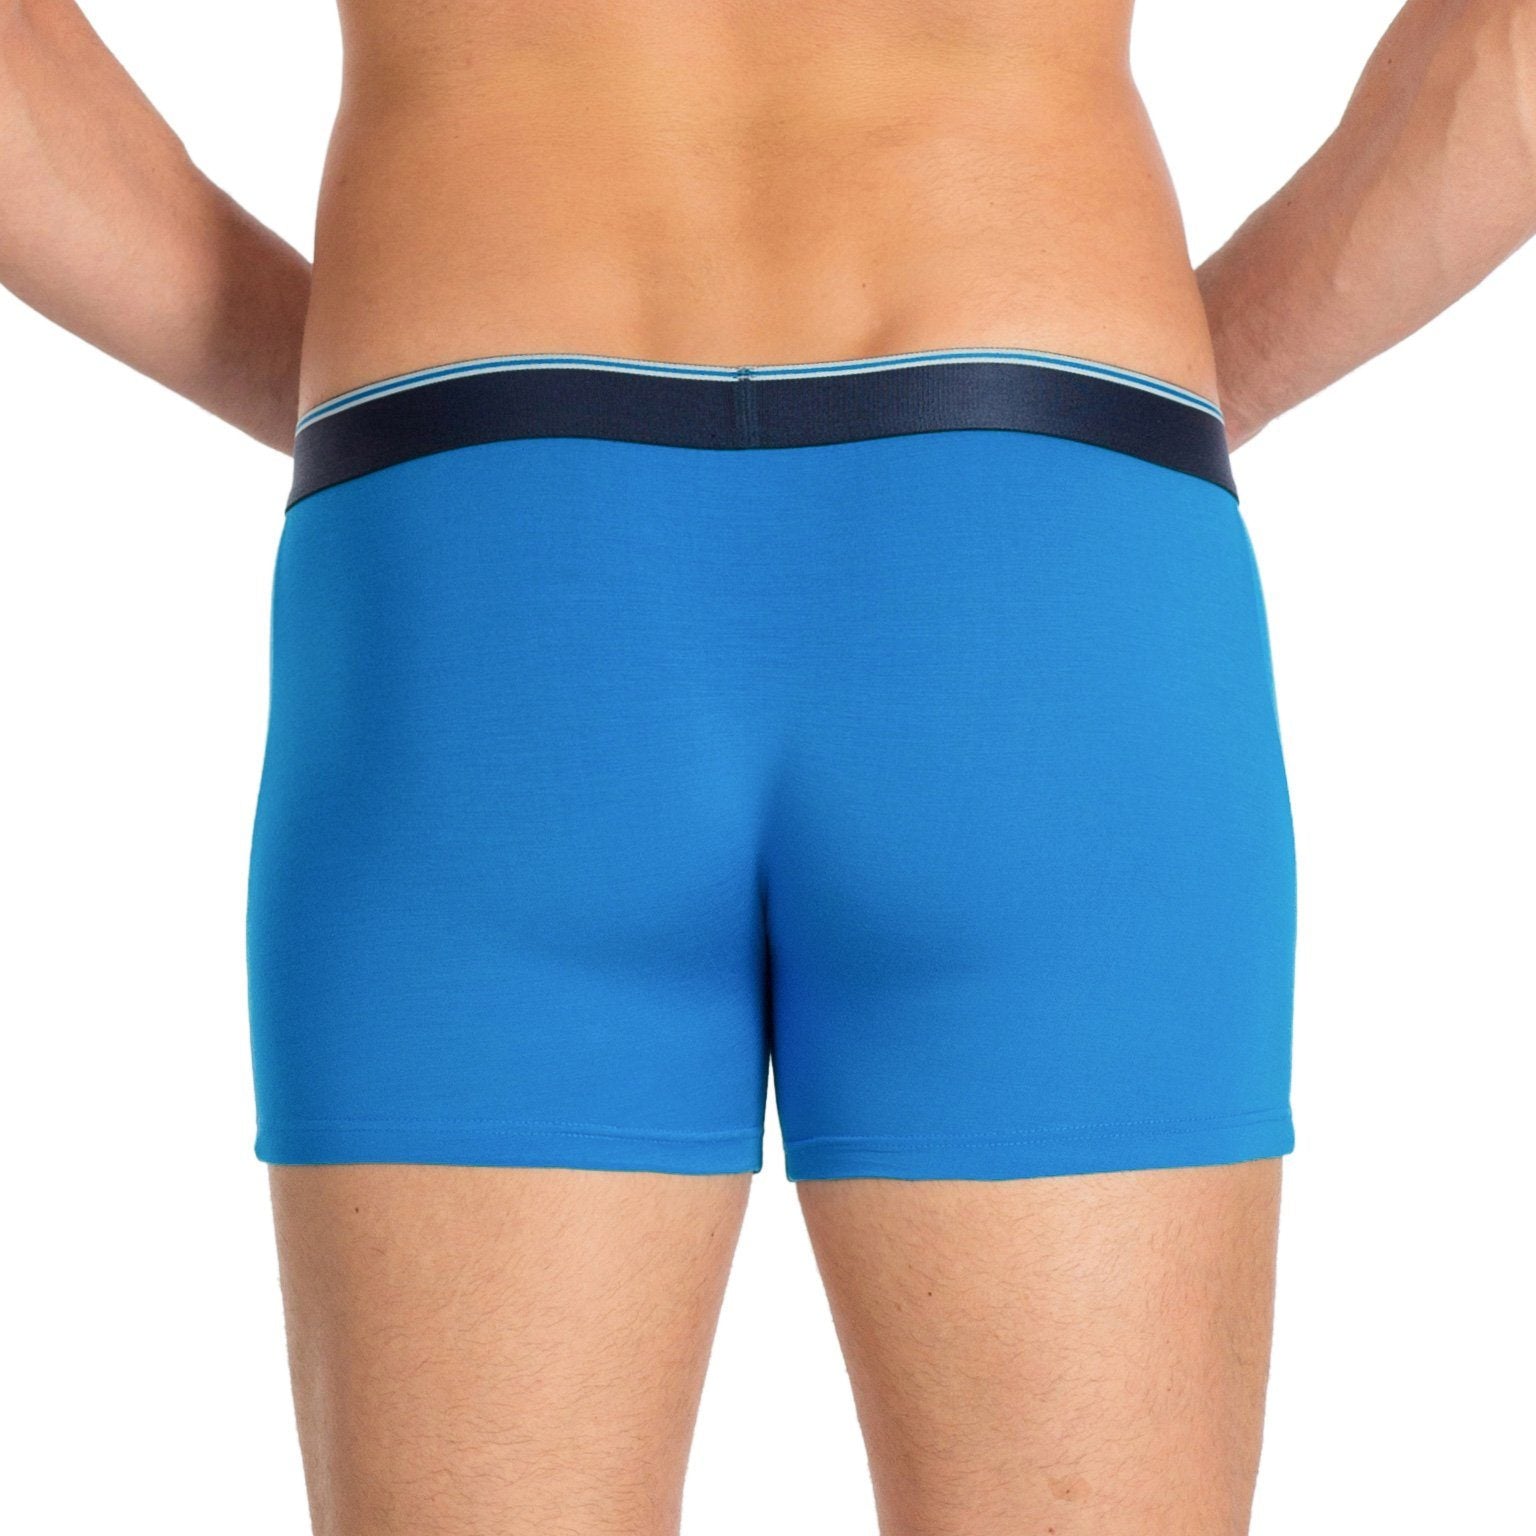 Blue Boxer Briefs  Obviously Apparel